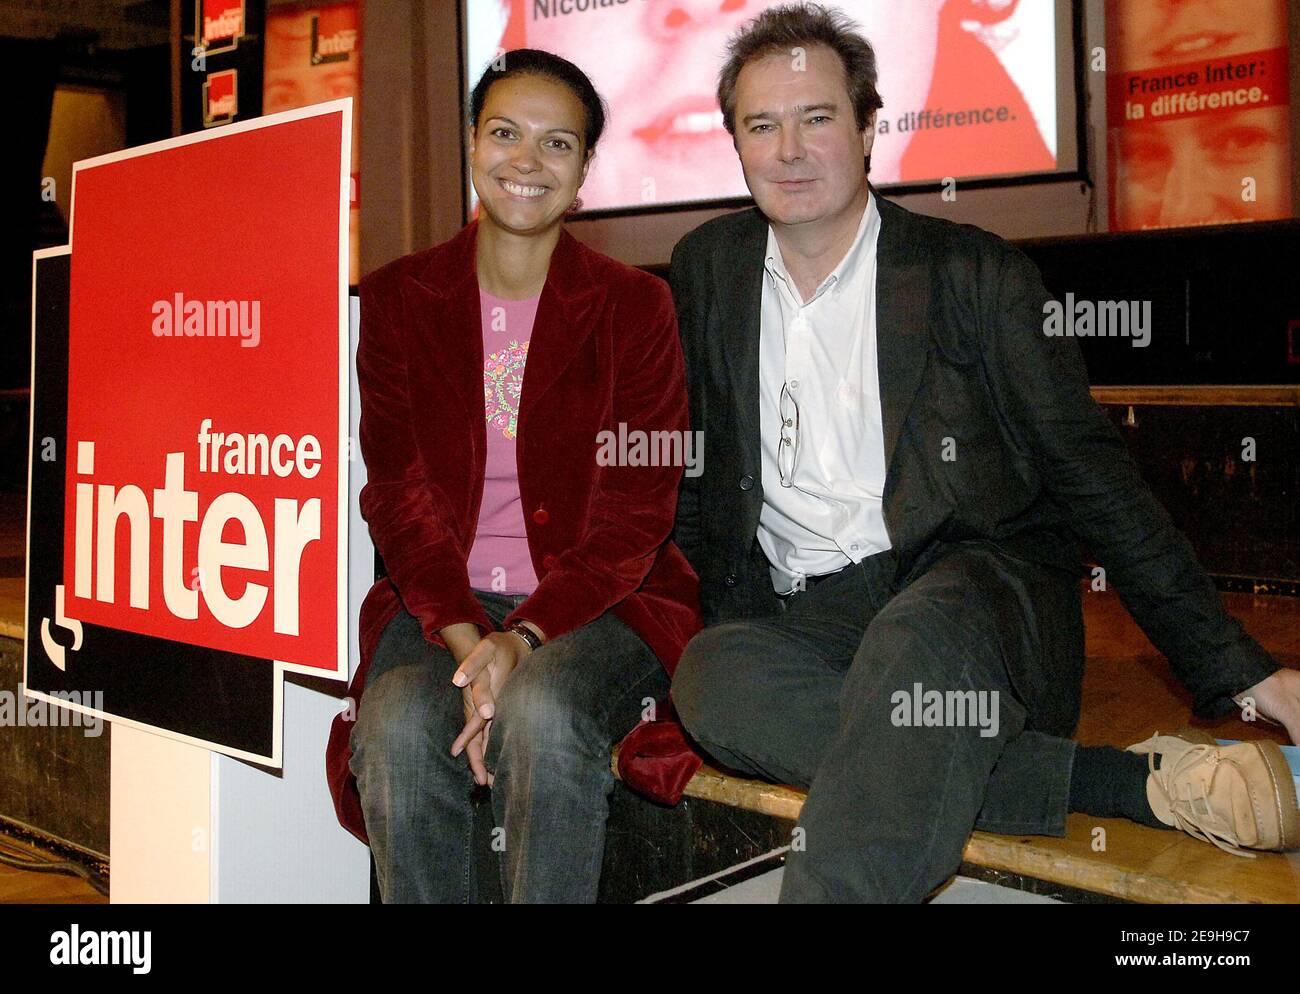 Isabelle Giordano and Yves Decaens during the annual press conference of French  radio station France Inter held at the Maison de la Radio in Paris, France  on september 4, 2006. Photo by